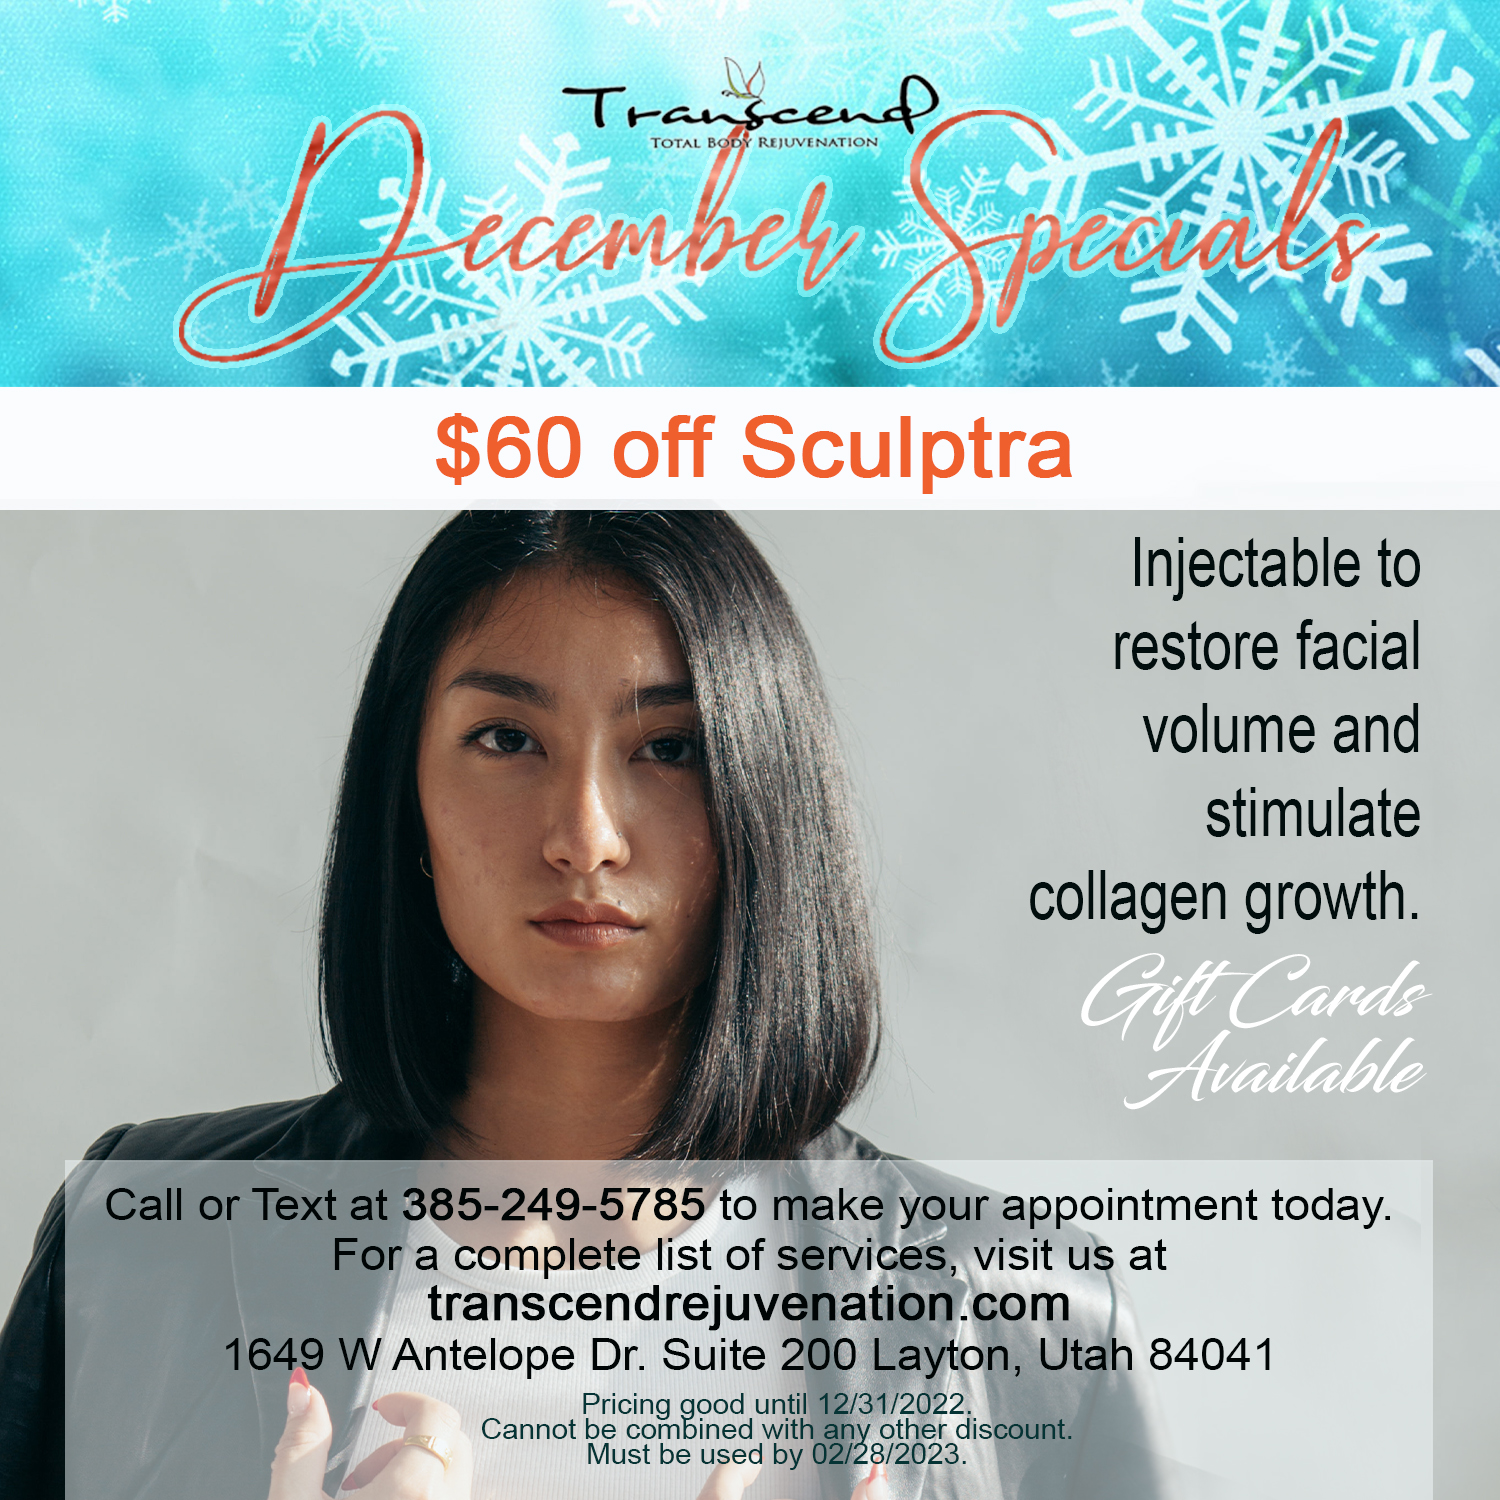 (Injectable to restore facial volume and stimulate collagen growth)